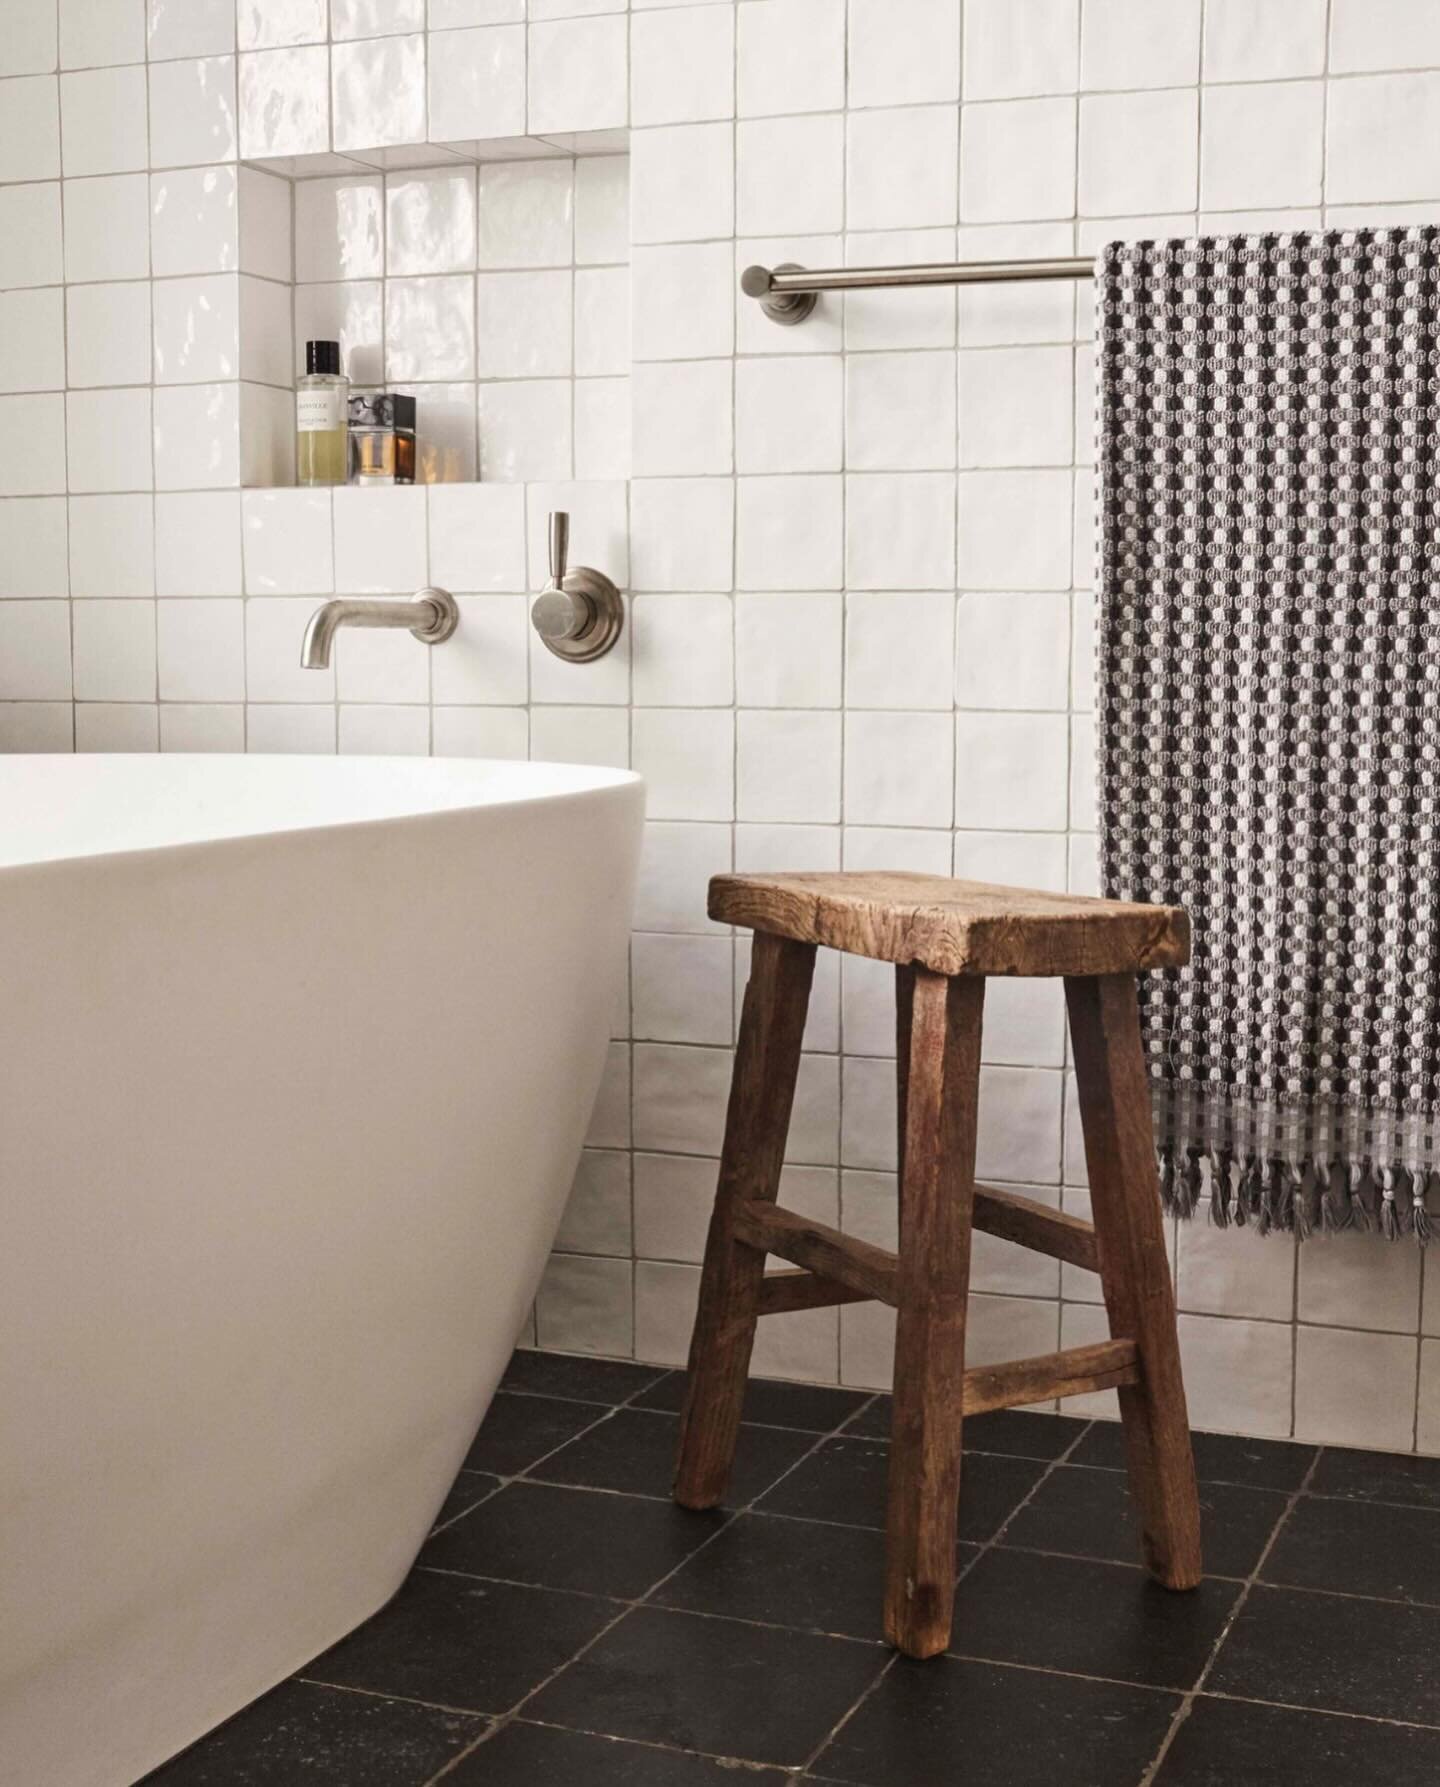 Throwback to this rustic beauty of a bathroom. The tumbled edges of the wall and floor tiles combined with the vintage stool adds a sense of warmth and nostalgia. 🖤🤍🤎